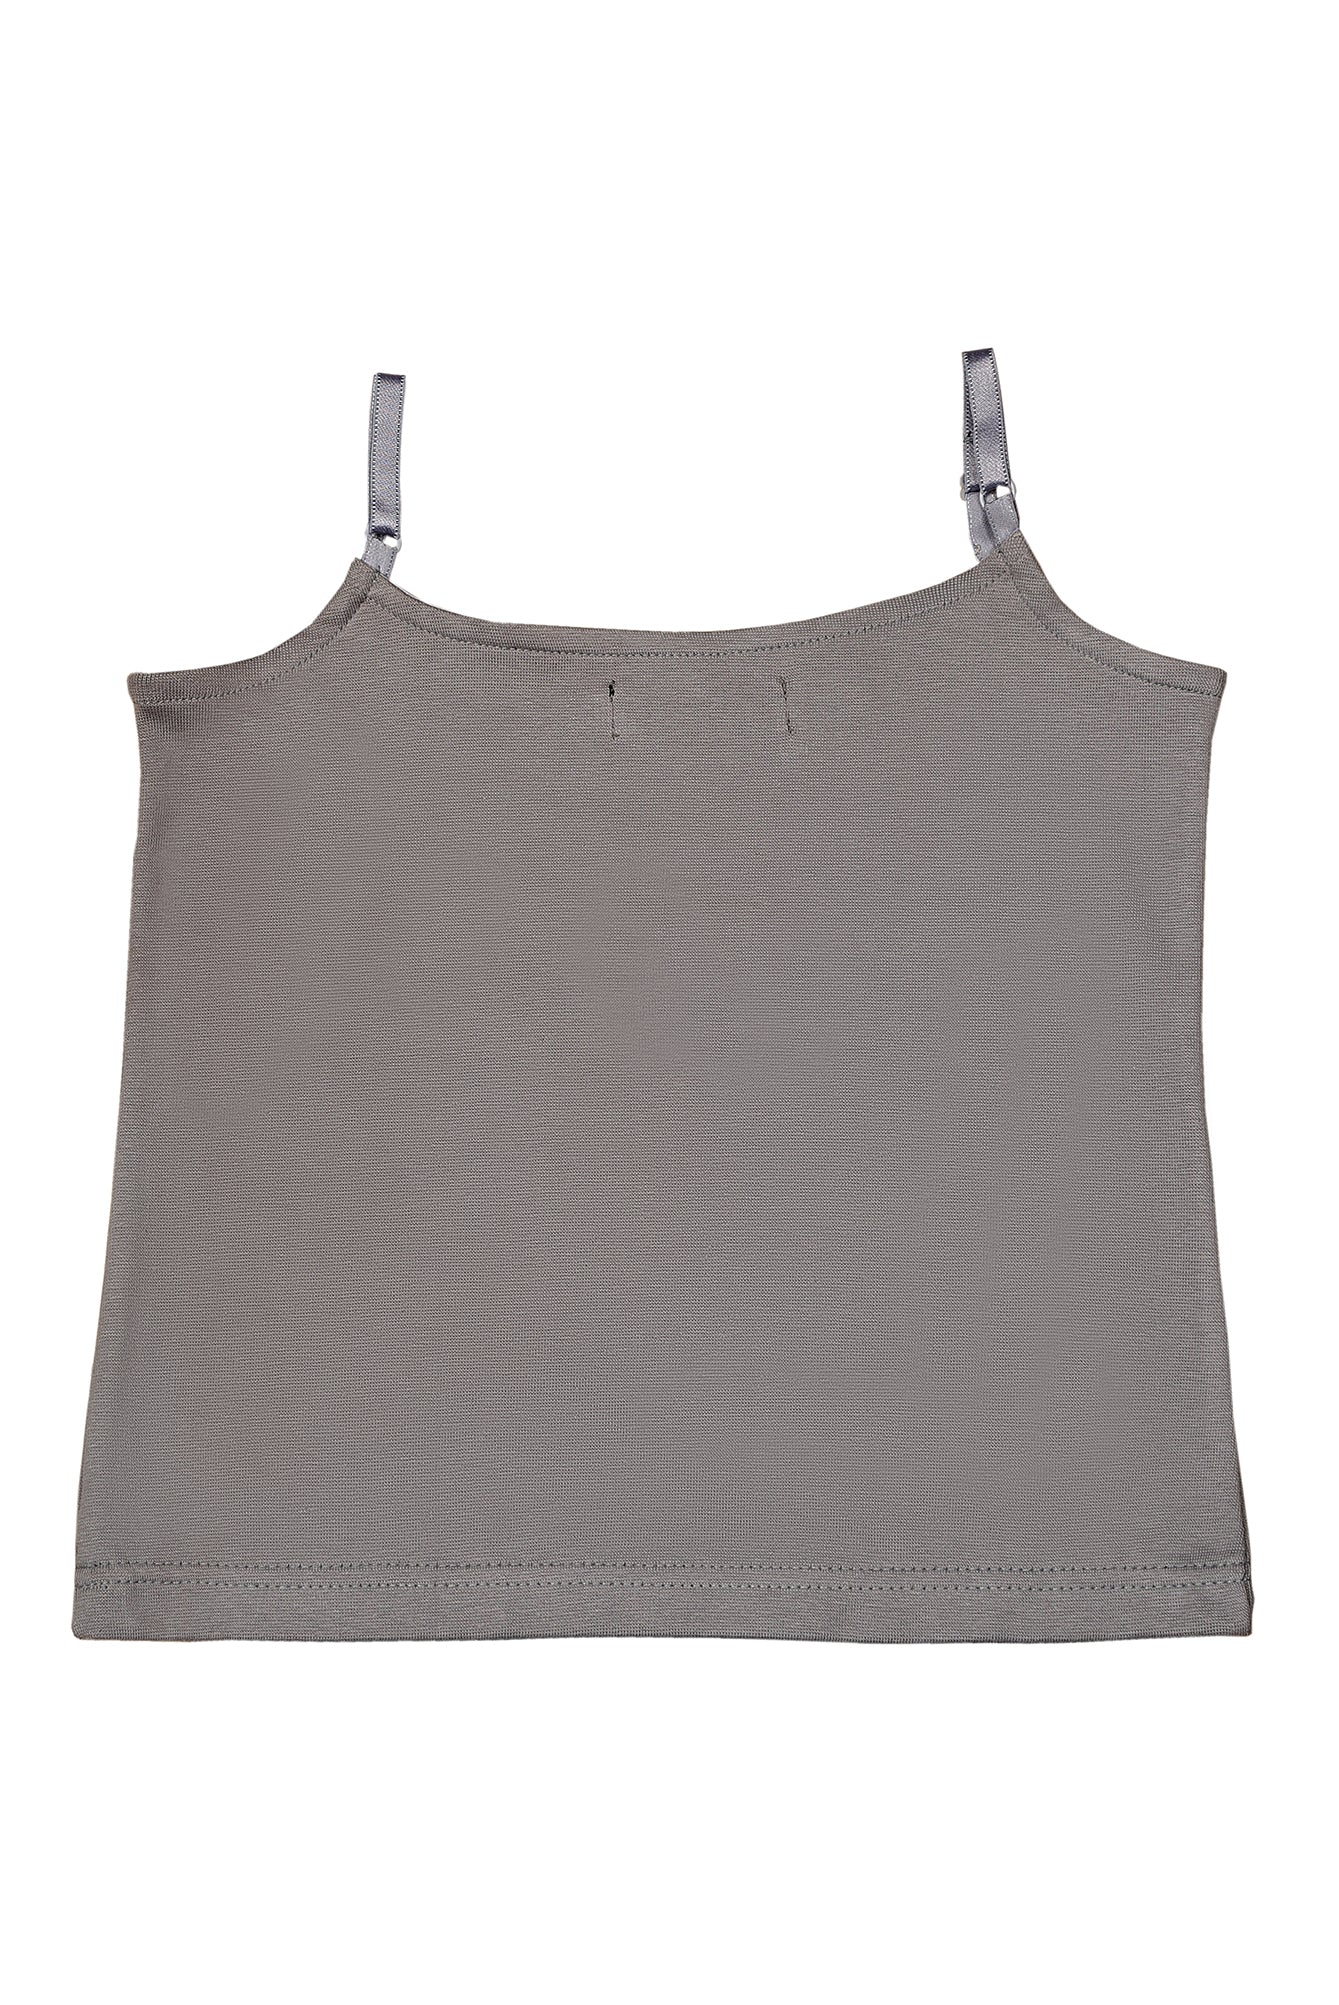 KDS-GC-13062 CAMISOLE GREY